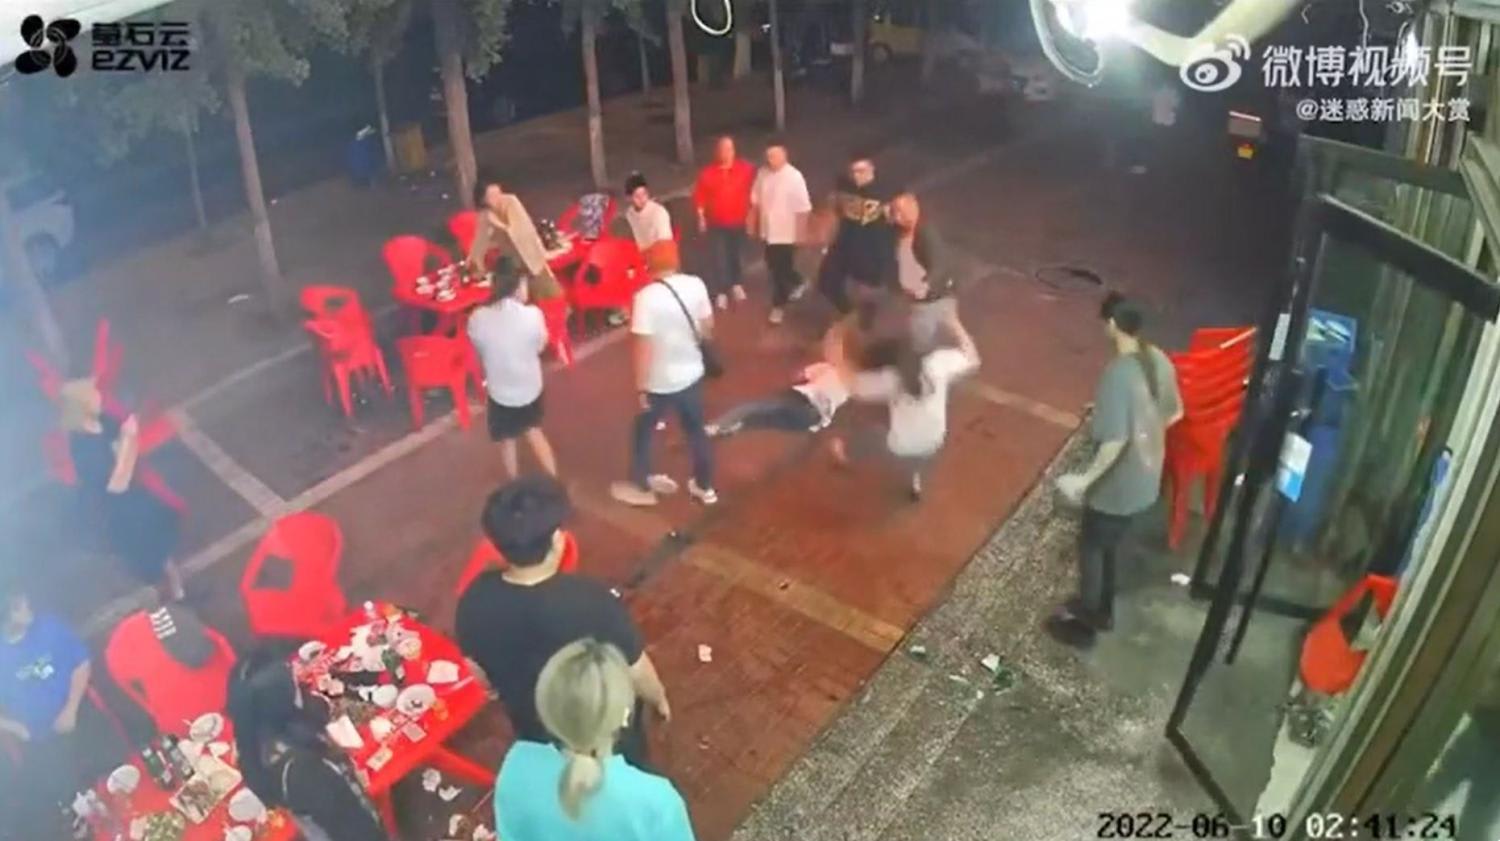 Footage of a group of men assaulting four women at a barbecue restaurant in Tangshan, east of the capital Beijing, was shared widely online, renewing debate about violence against women in China.